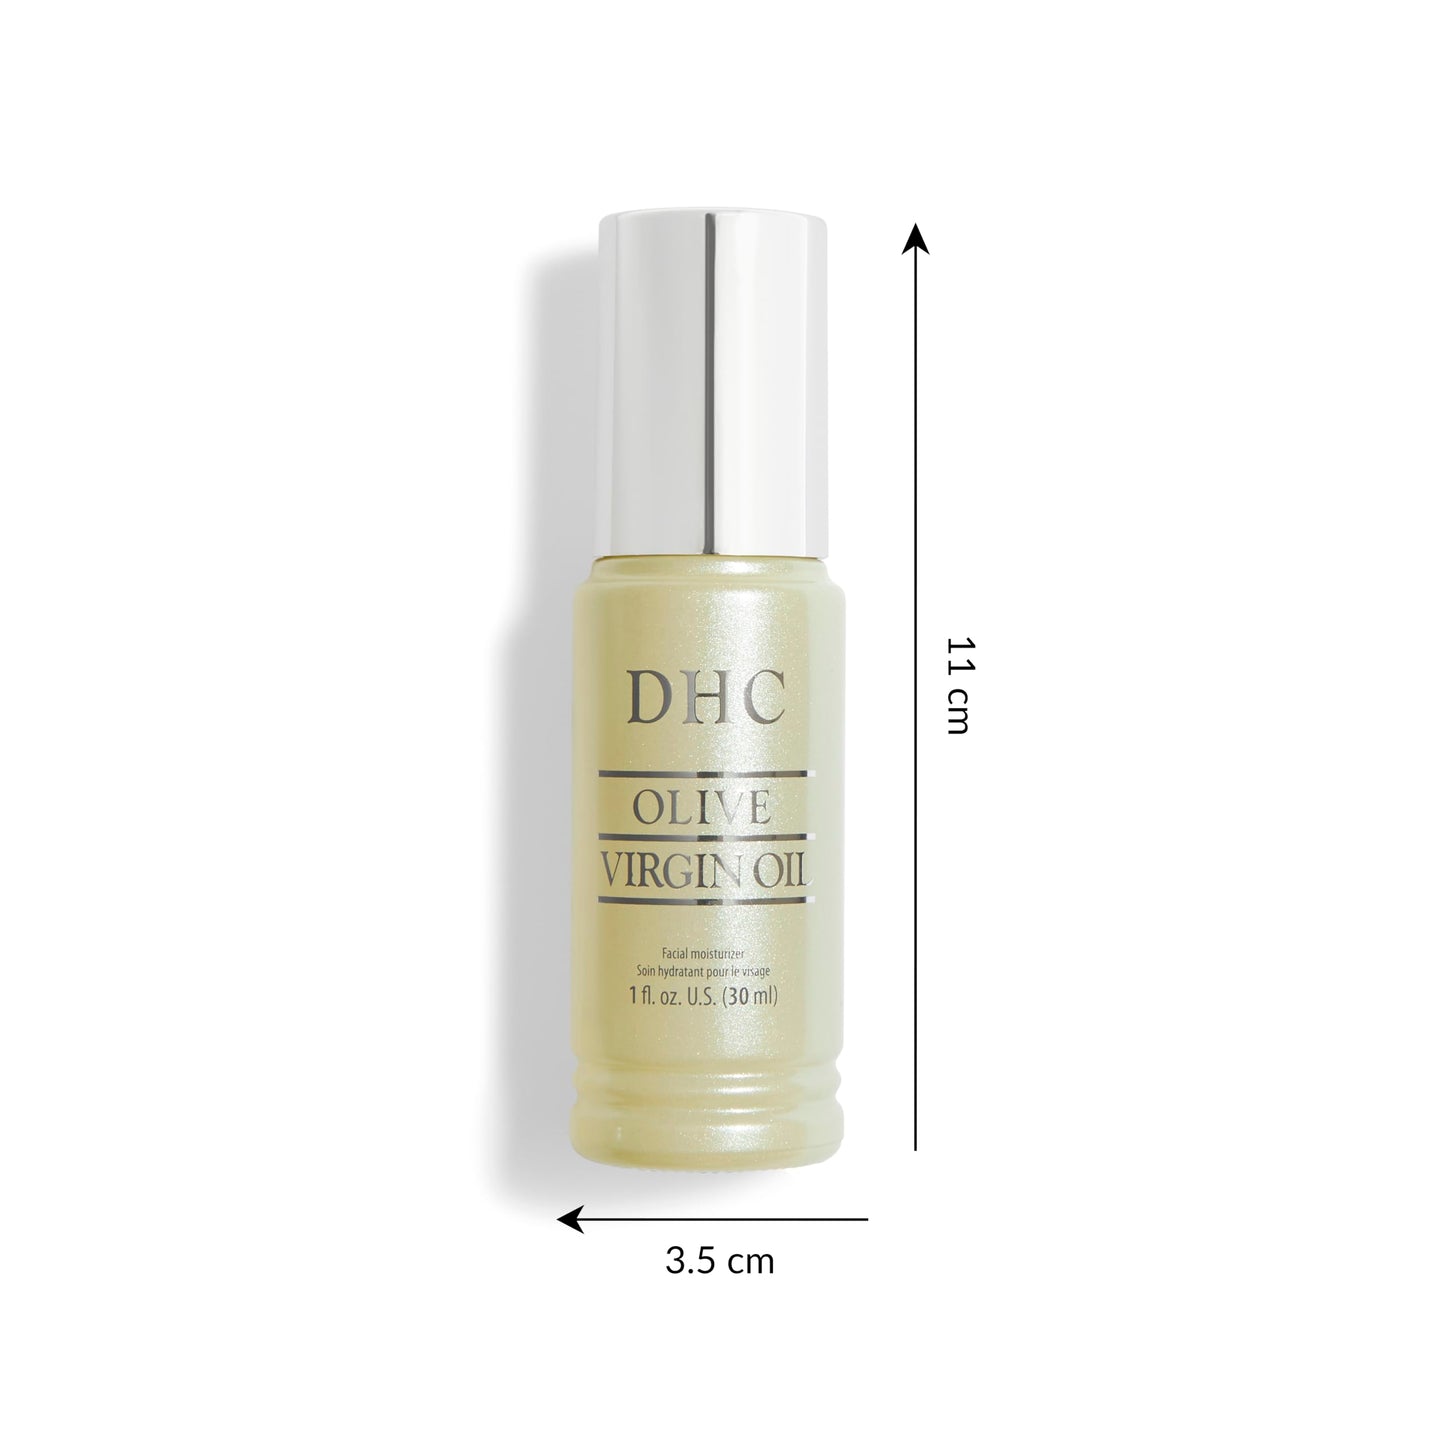 DHC Olive Virgin Oil Facial Moisturizer, Hydrating, Nourishing, Lightweight, Fragrance and Colorant Free, All Skin Types, 1 fl. oz.